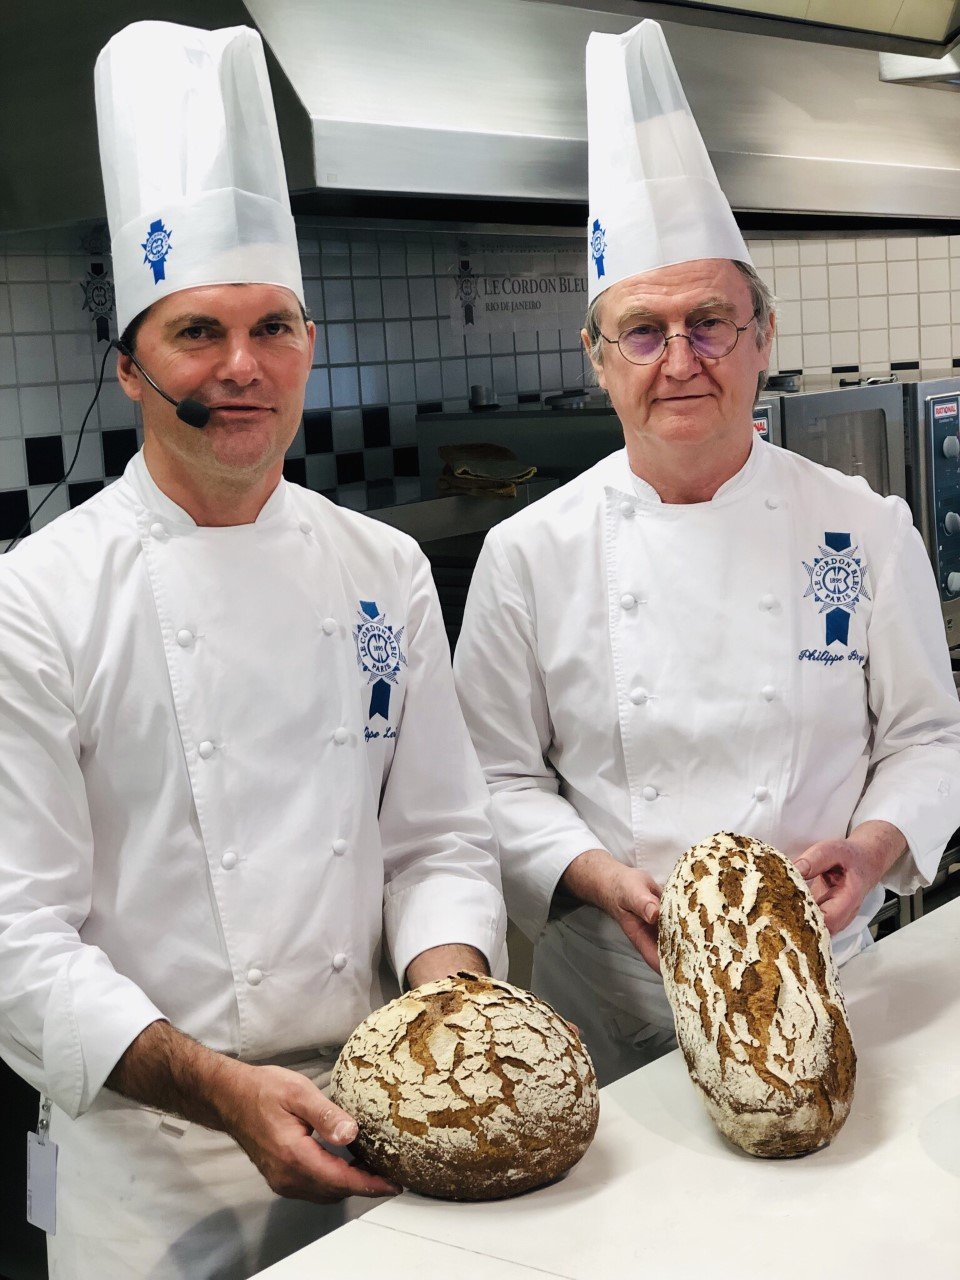 Head Chef Philippe Brye and Chef Philippe Lanié at the Bread and Flavors Festival in Nova Friburgo!